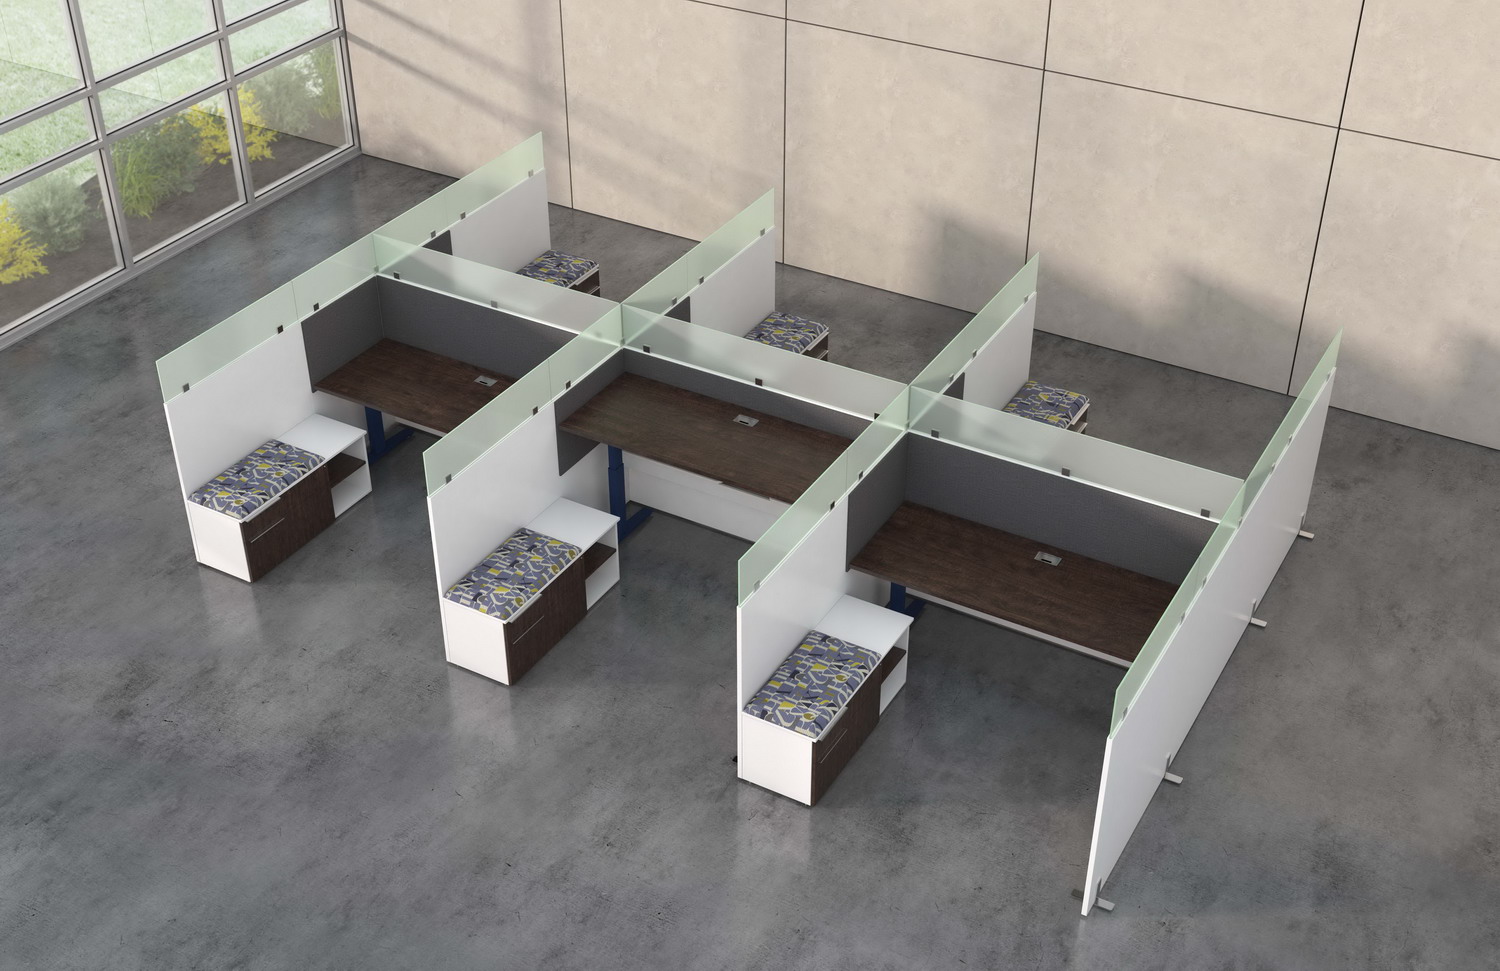 Contract Furniture Rendering: Hover Benching